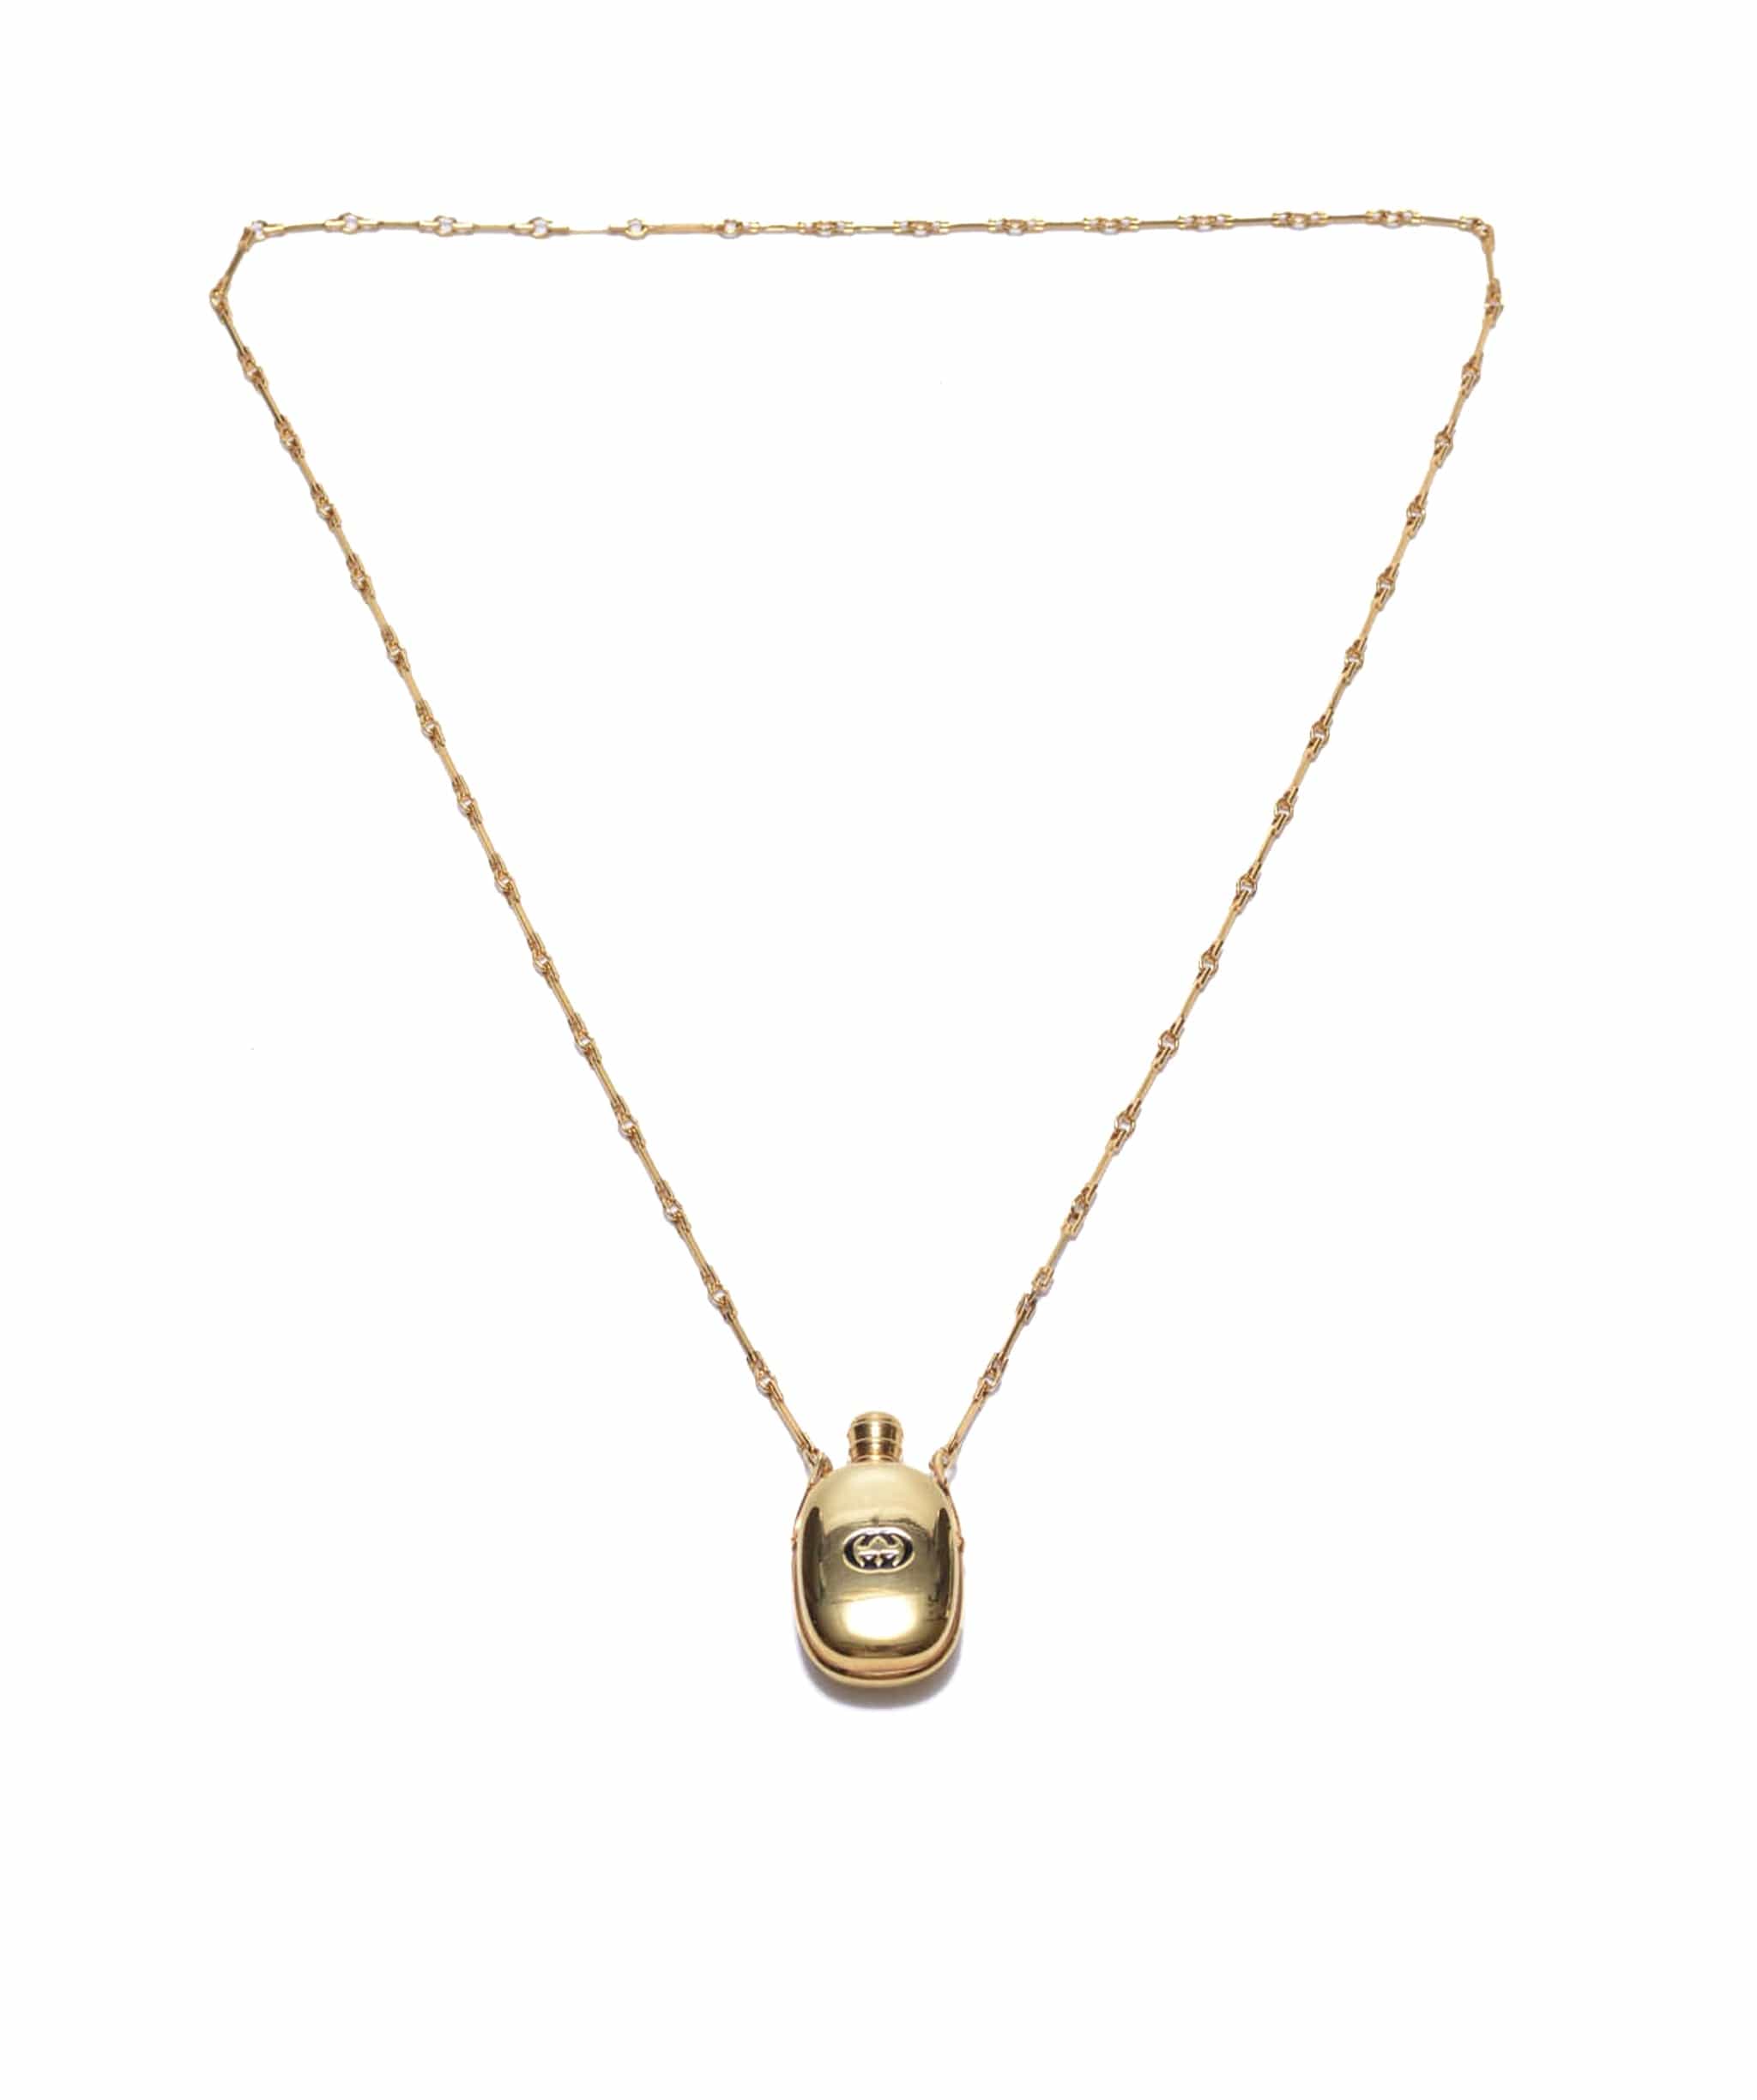 Gucci Gucci perfume bottle necklace - AWC1726